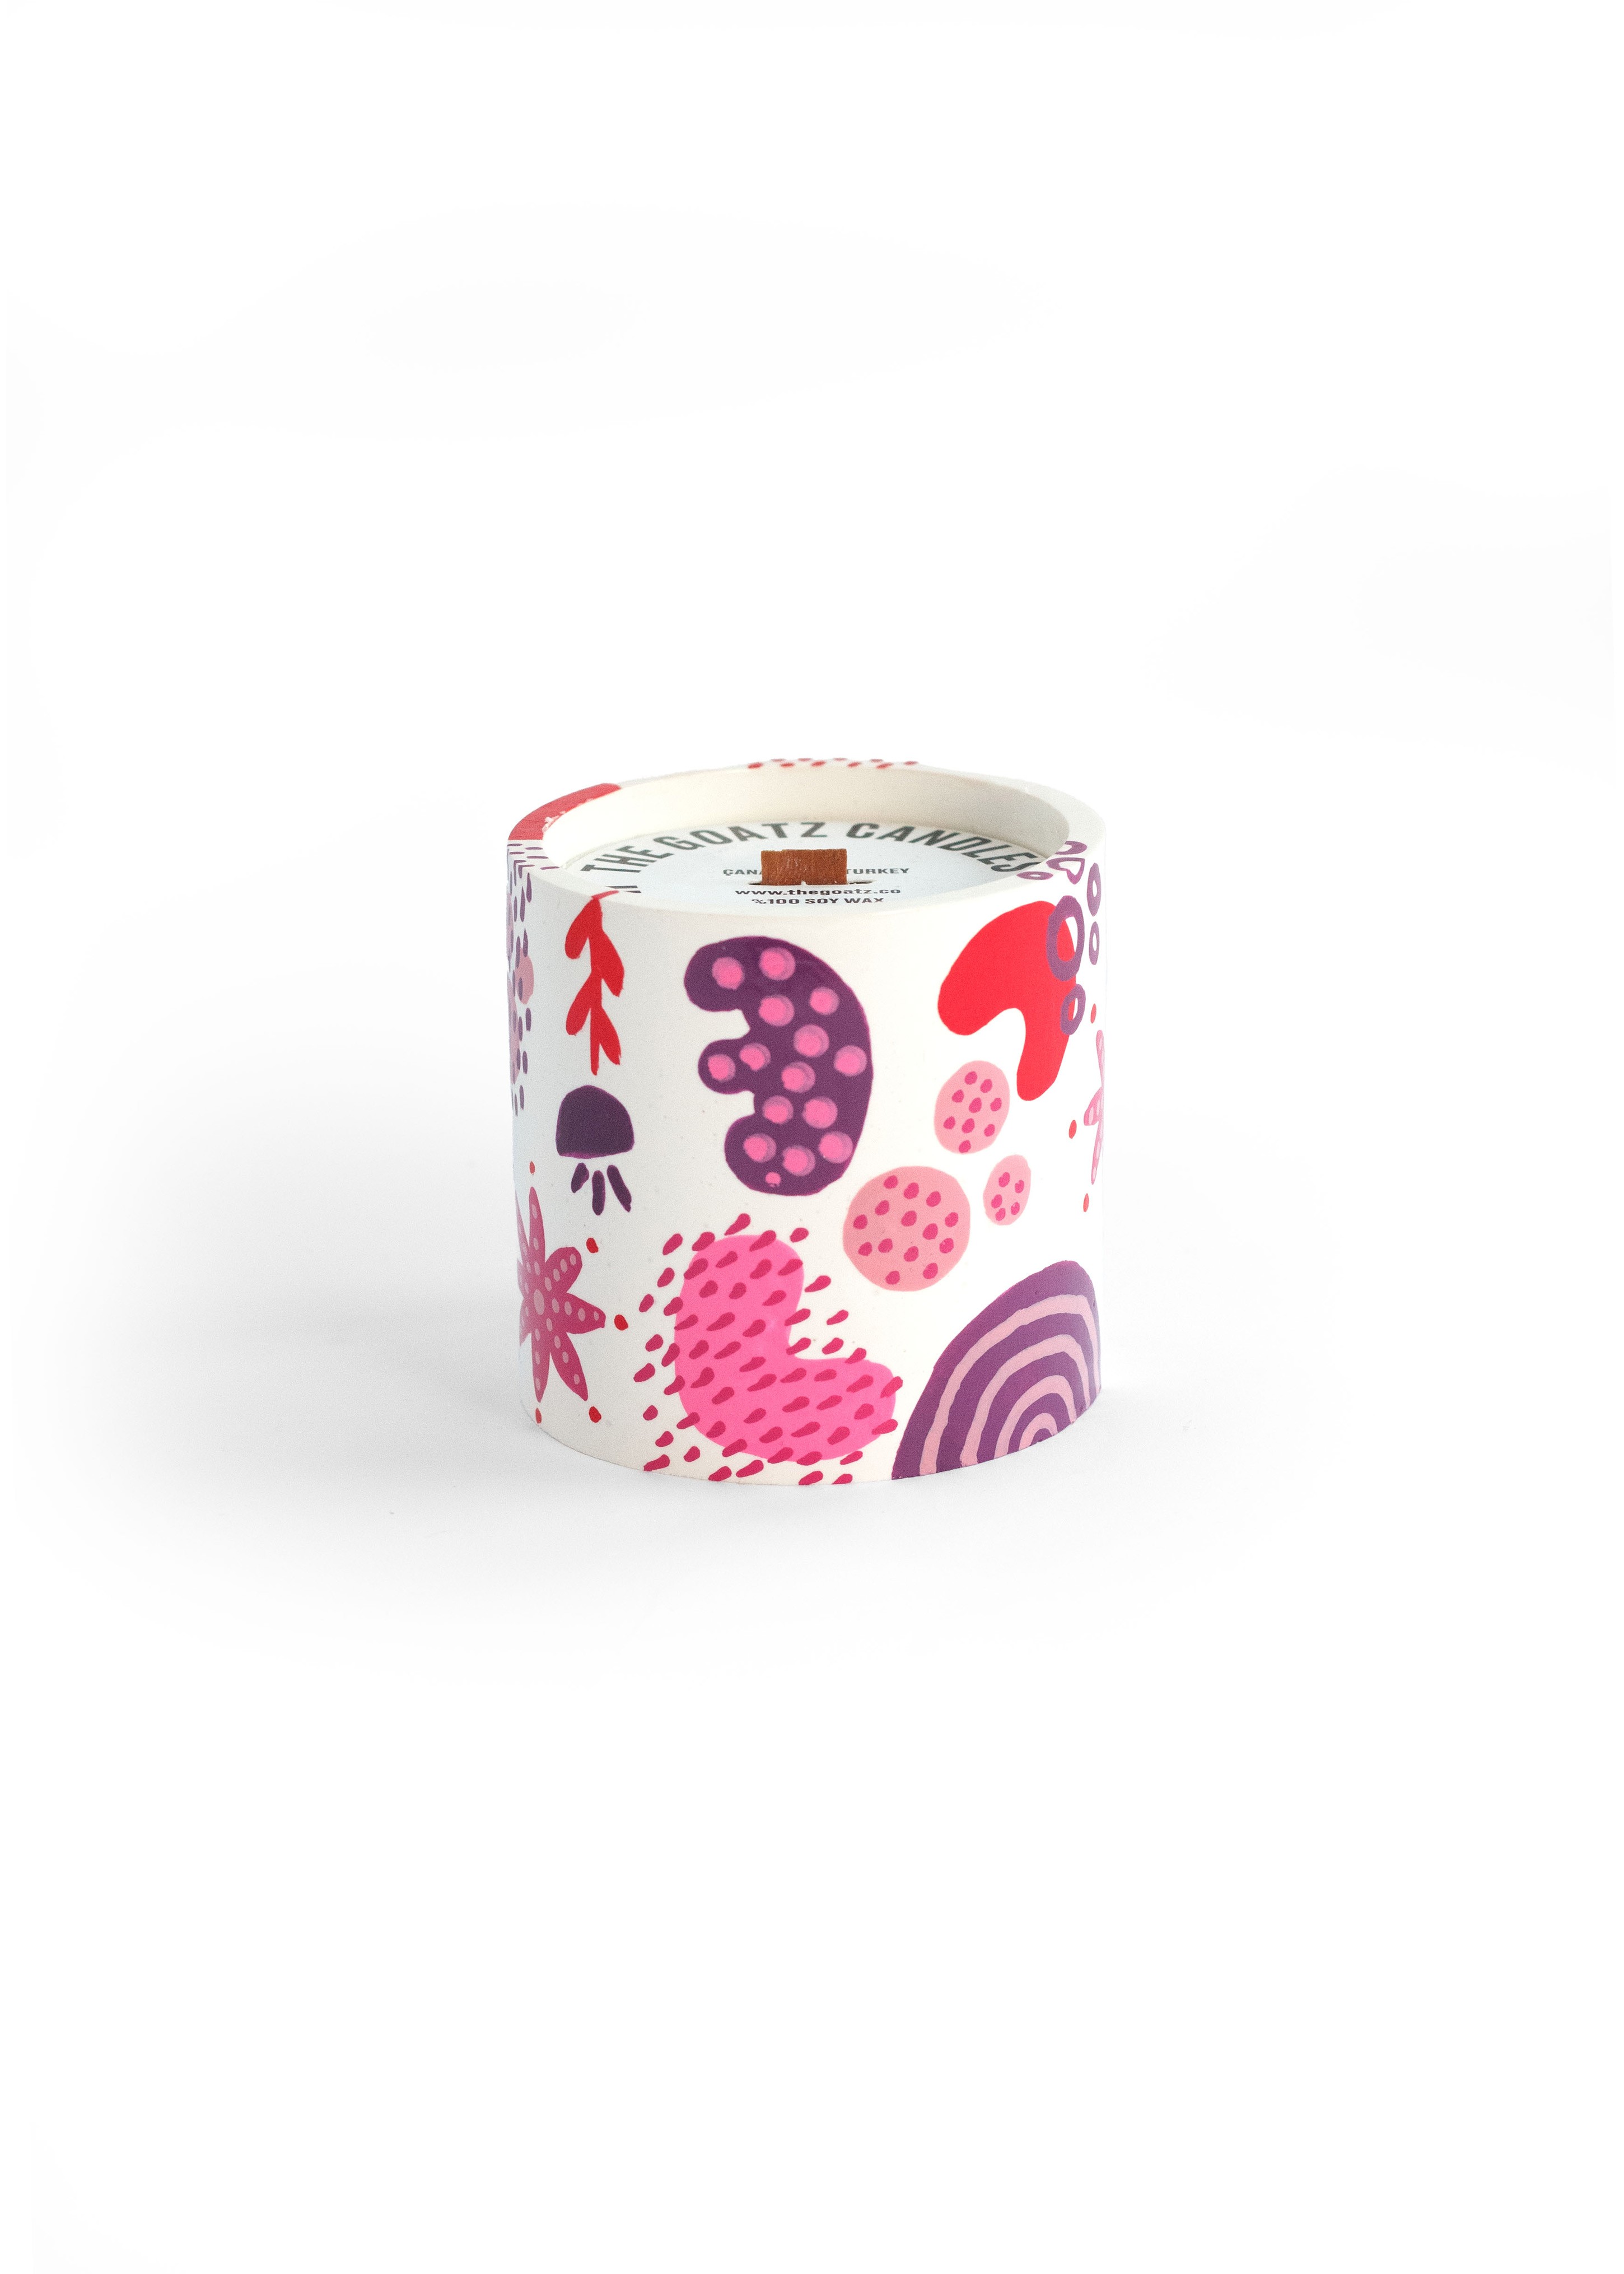 The Goatz Candles Pop Up Soy Candle